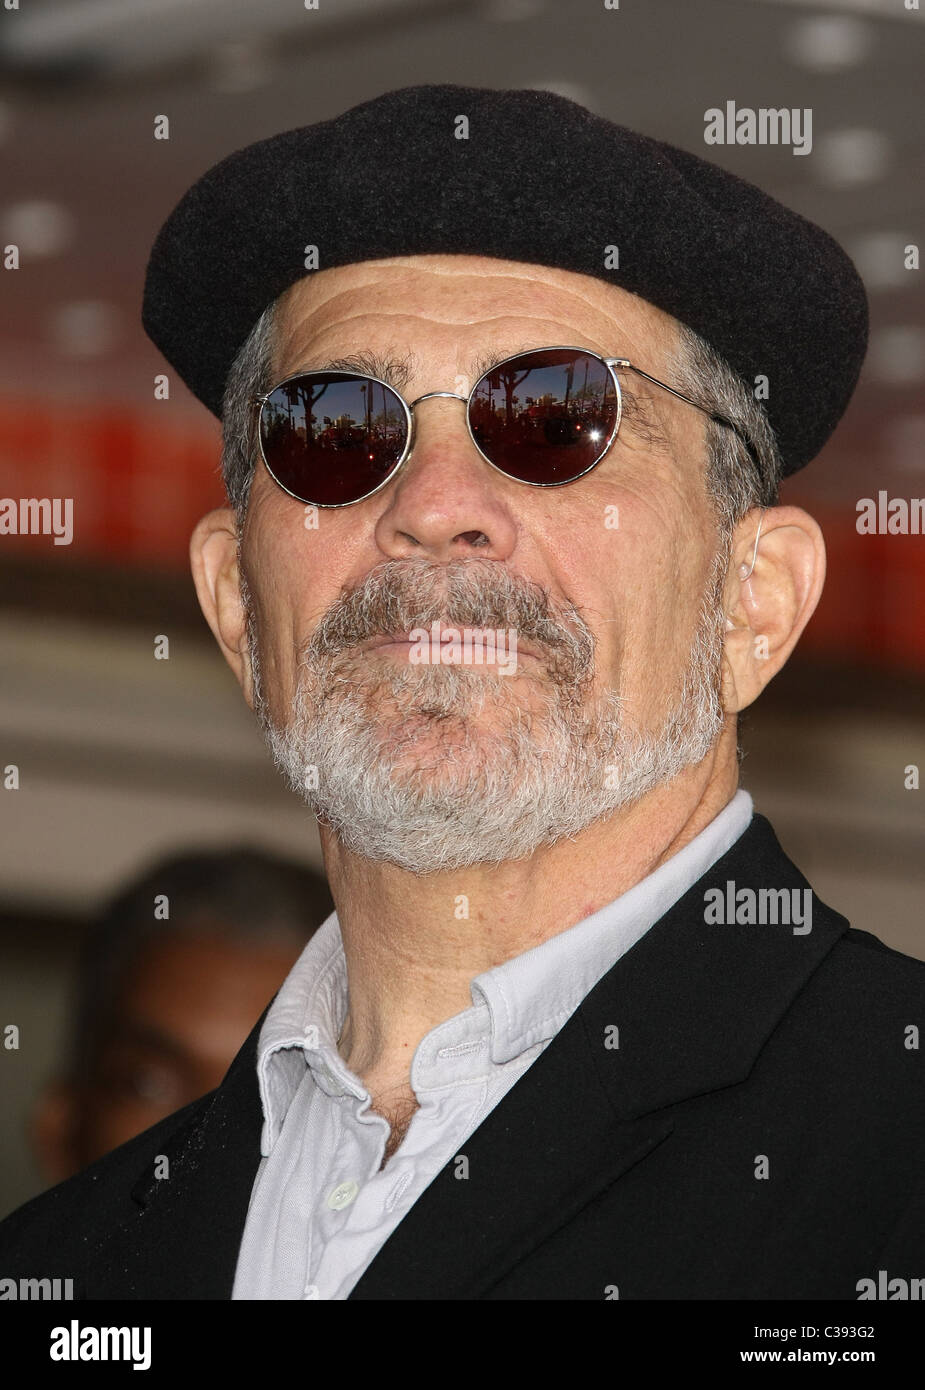 DAVID MAMET JOE MANTEGNA HONORED WITH A STAR ON THE HOLLYWOOD WALK OF FAME HOLLYWOOD LOS ANGELES CALIFORNIA USA 29 April 2011 Stock Photo